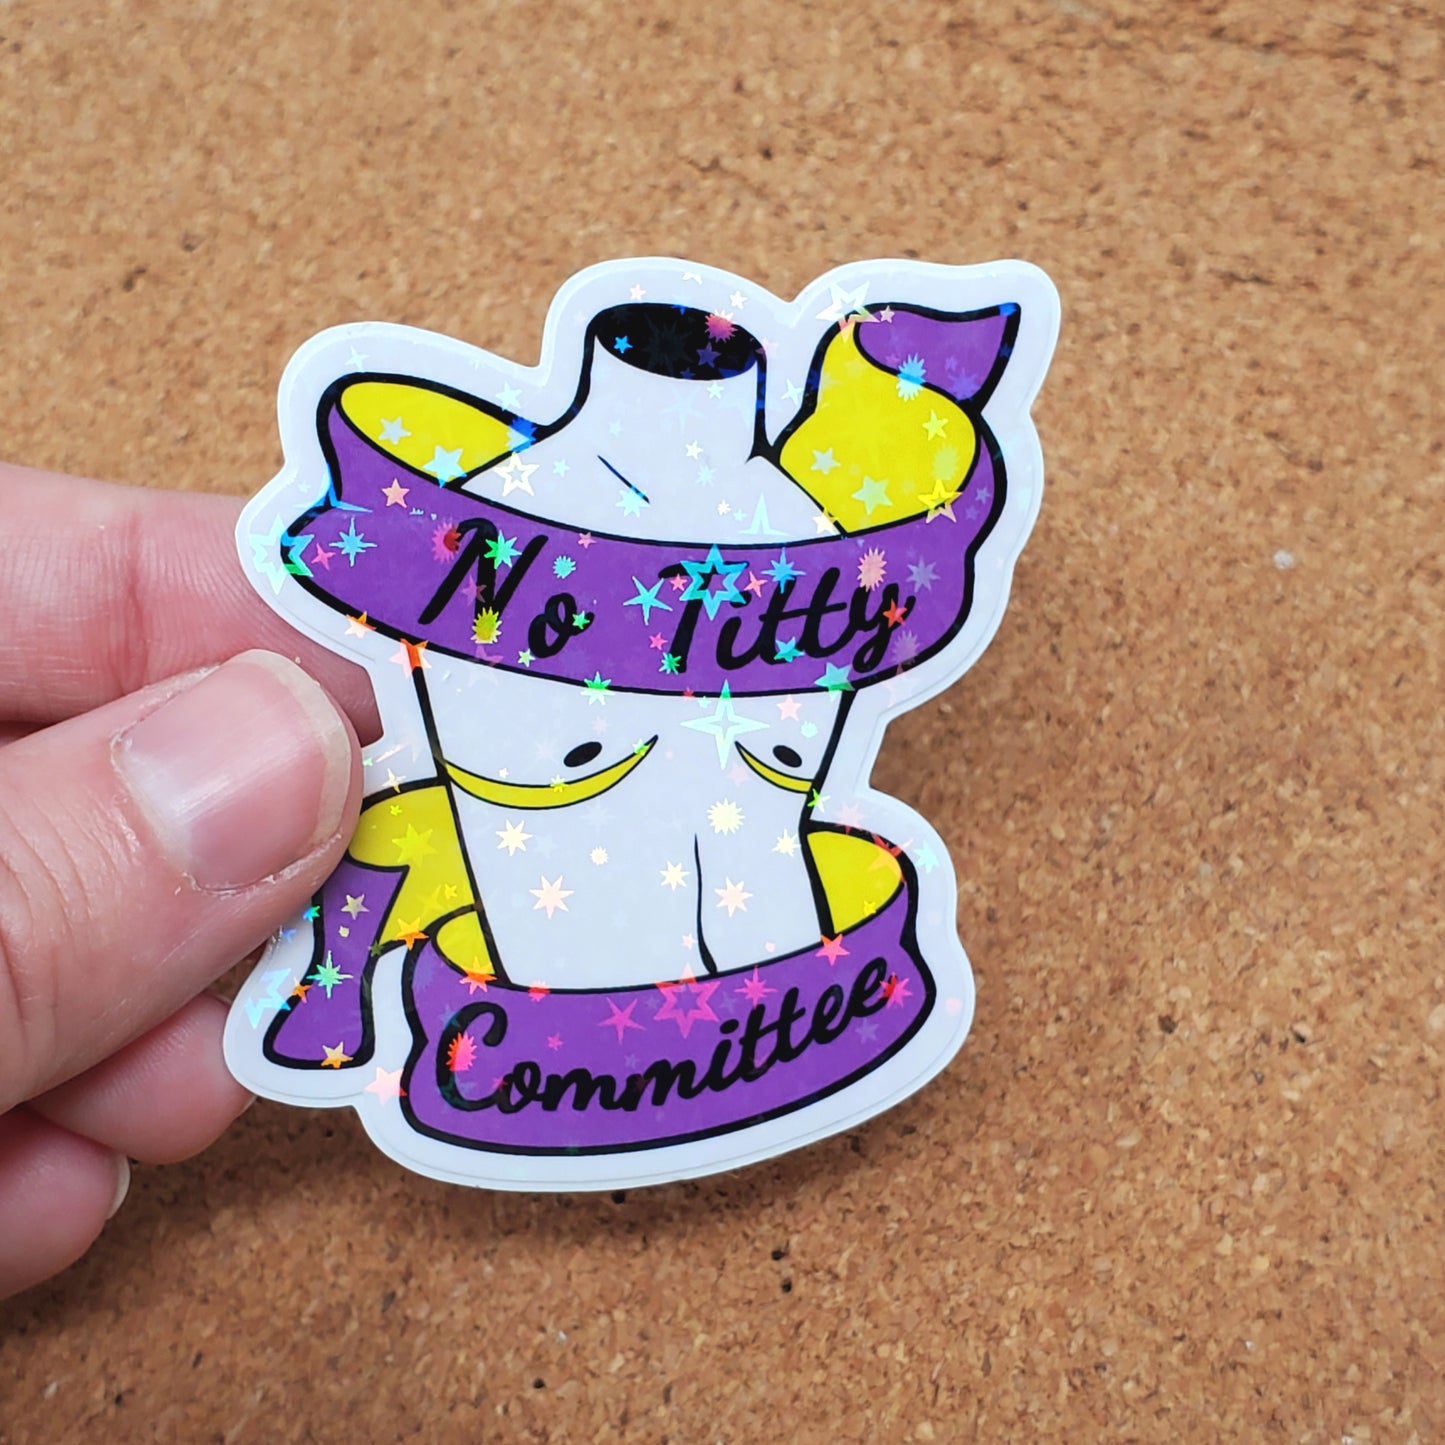 No Titty Committee Top Surgery Pride 2.5" Holo Vinyl Sticker